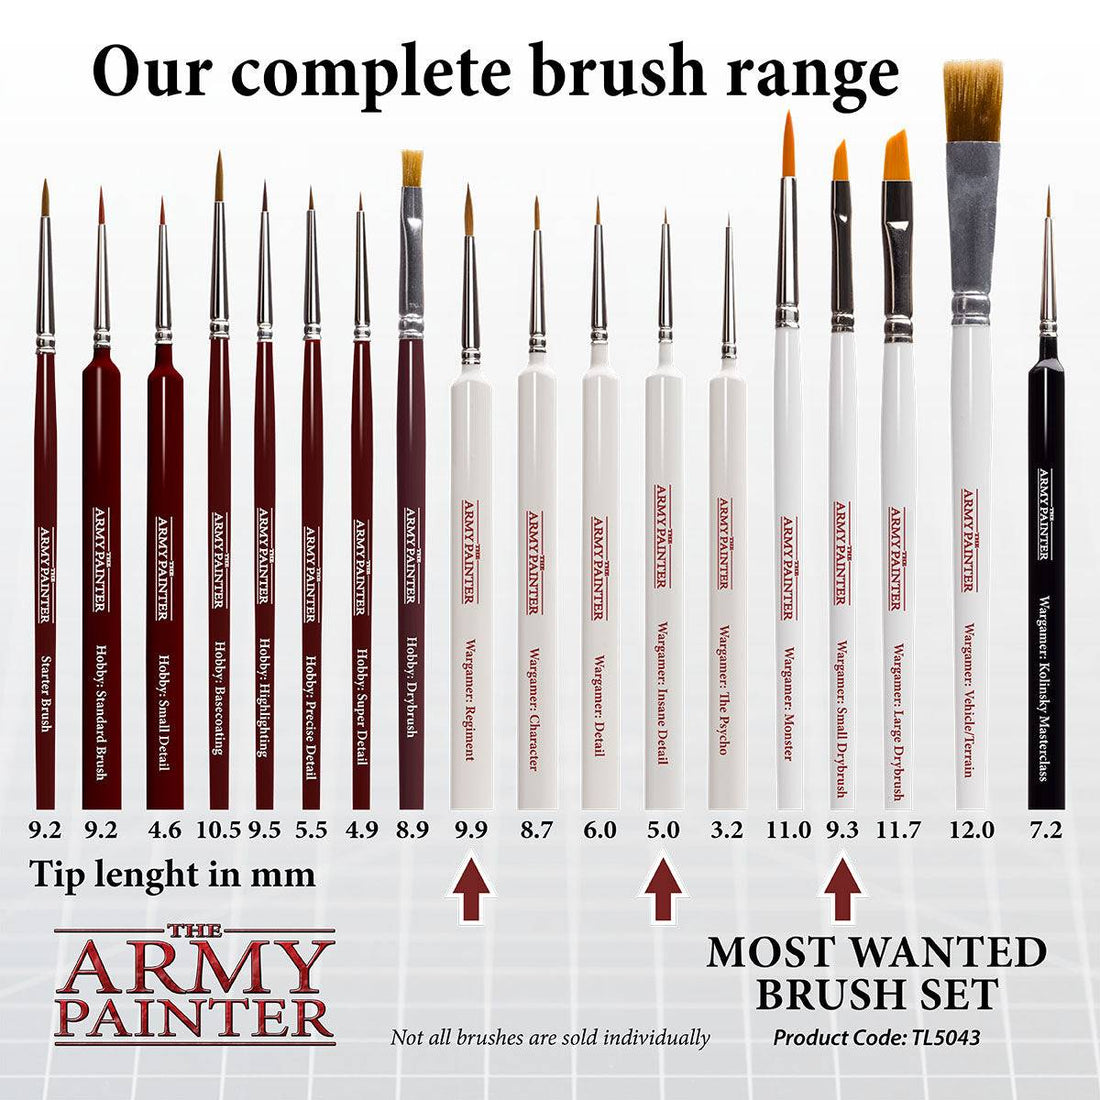 Army Painter: Most Wanted Brush Set